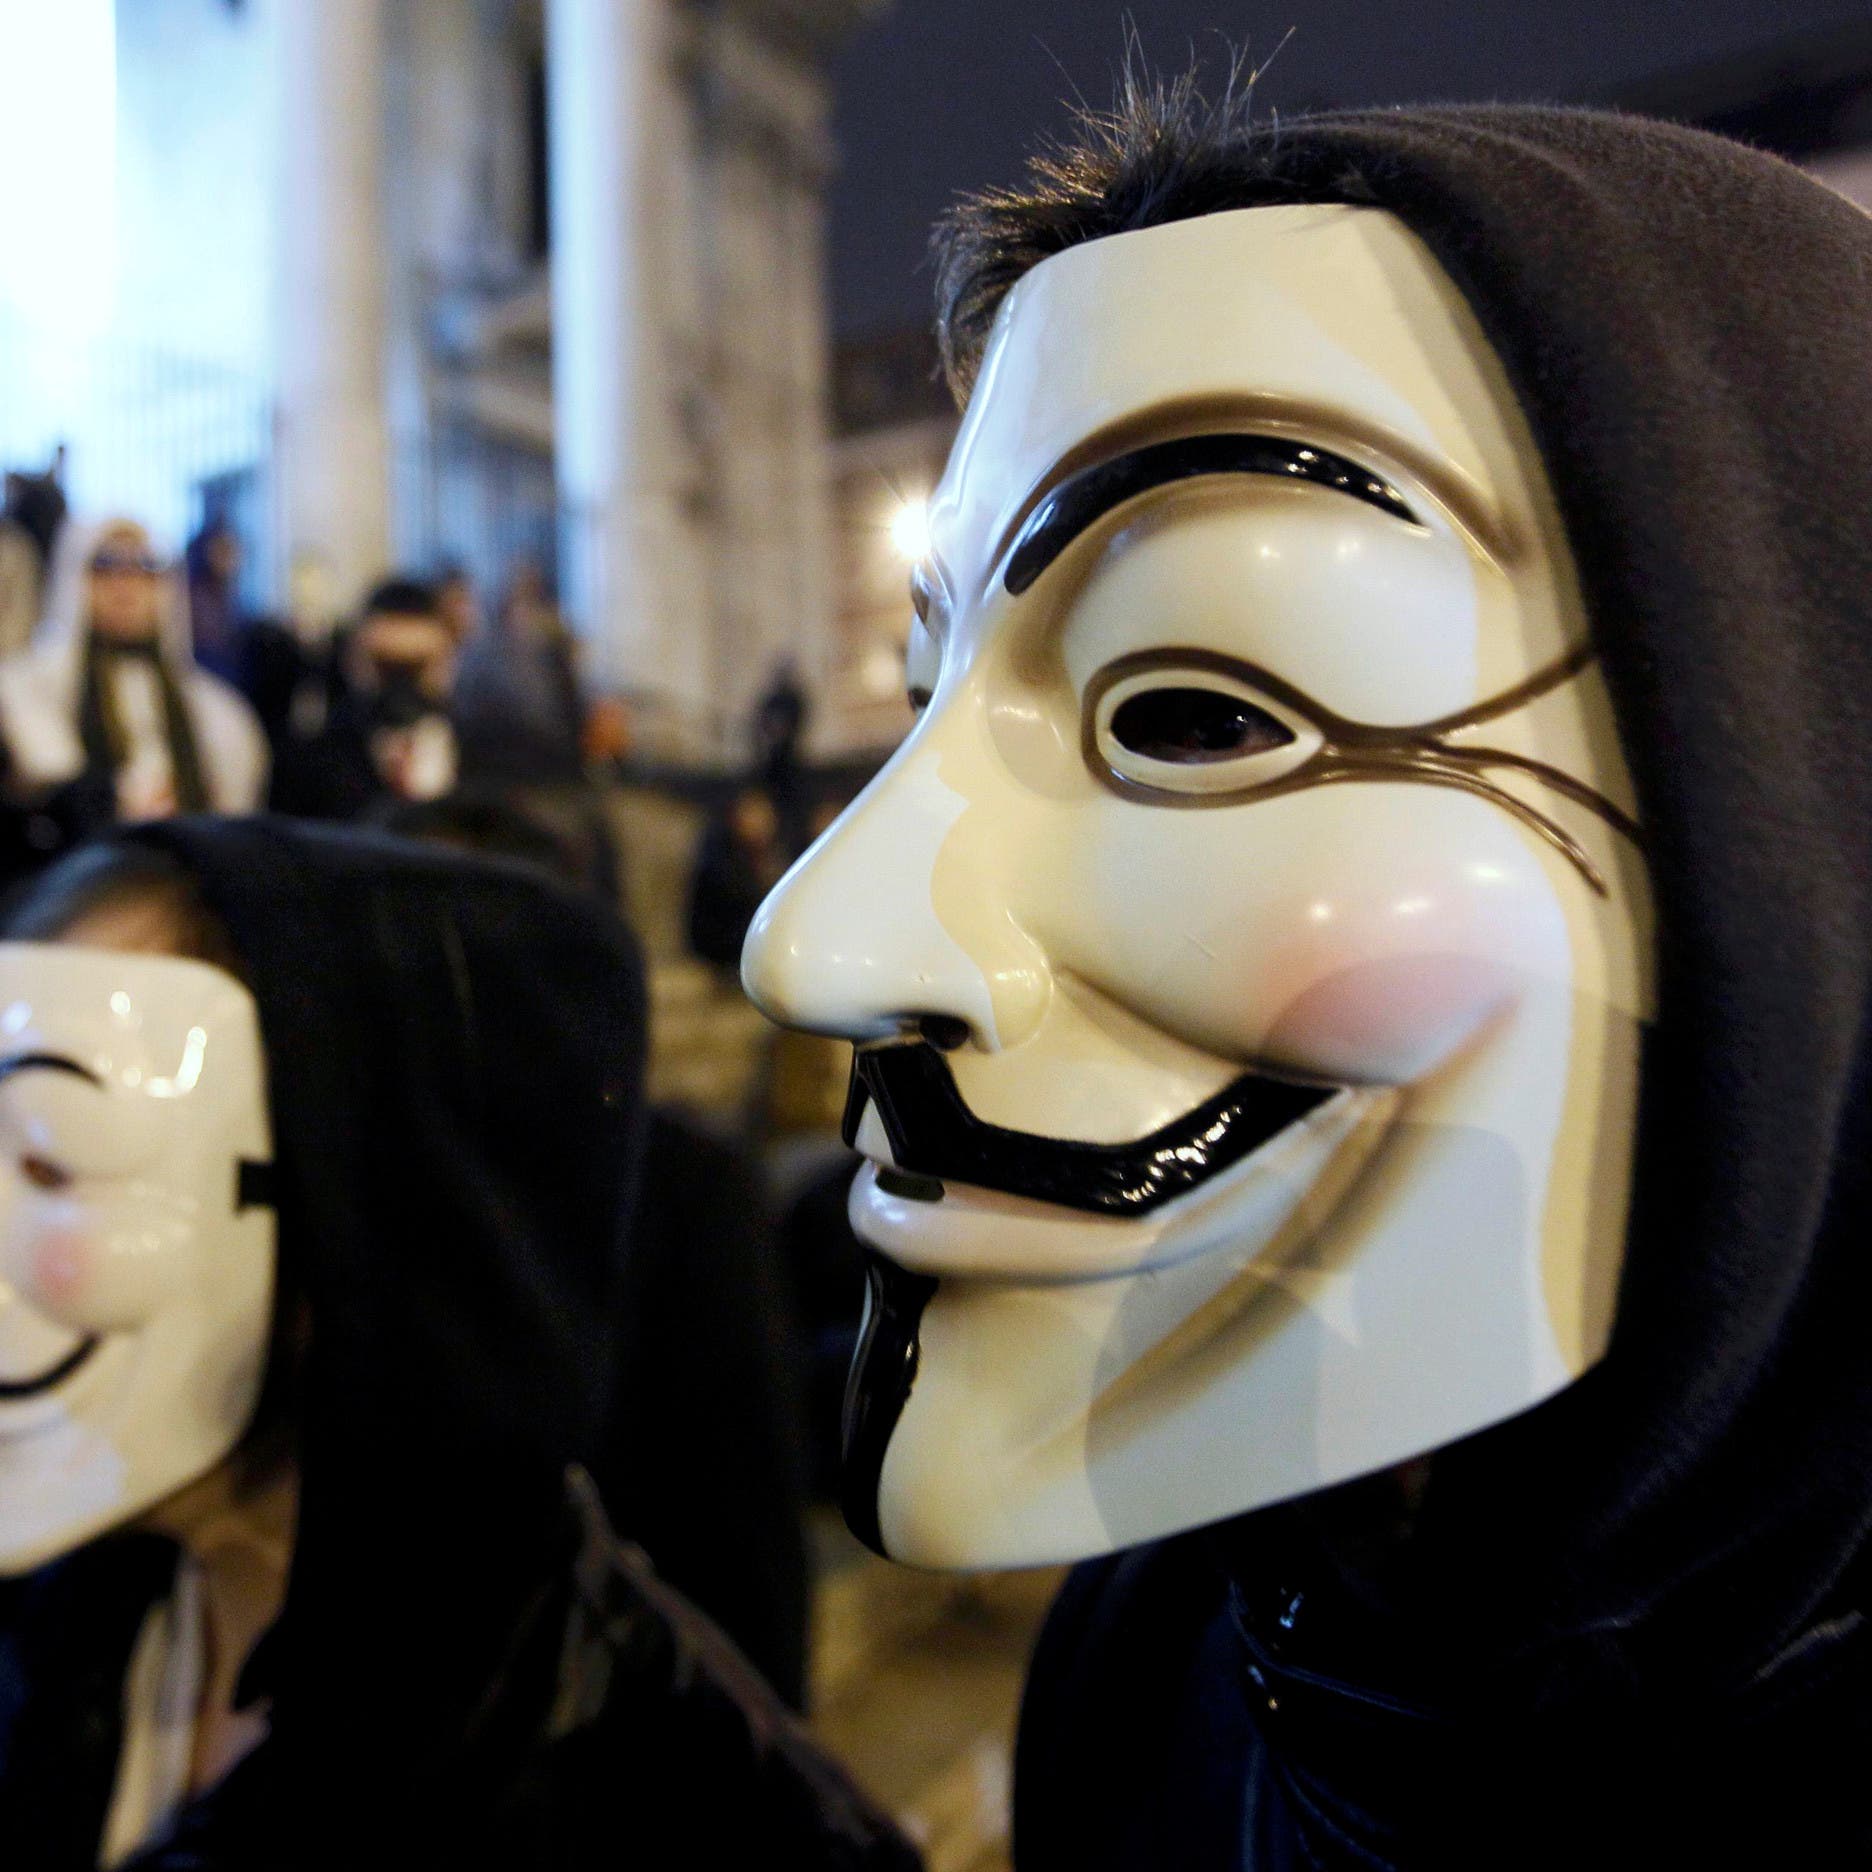 Hacktivist group Anonymous launches series of cyberattacks against Russia